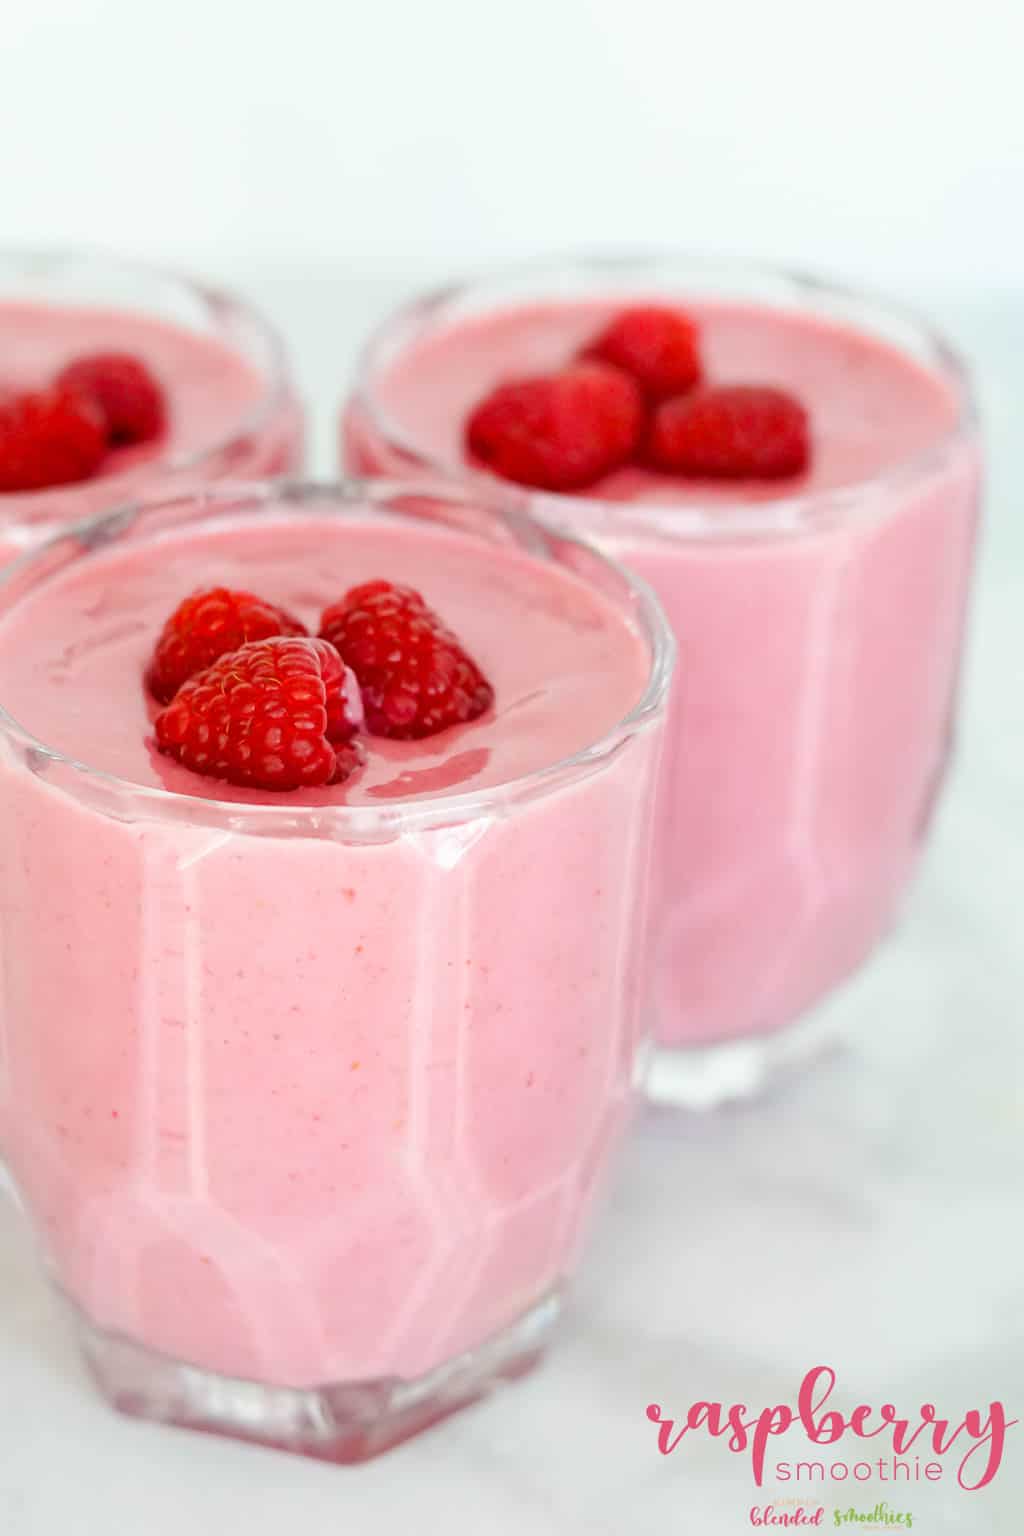 Delicious And Easy To Make Raspberry Smoothie